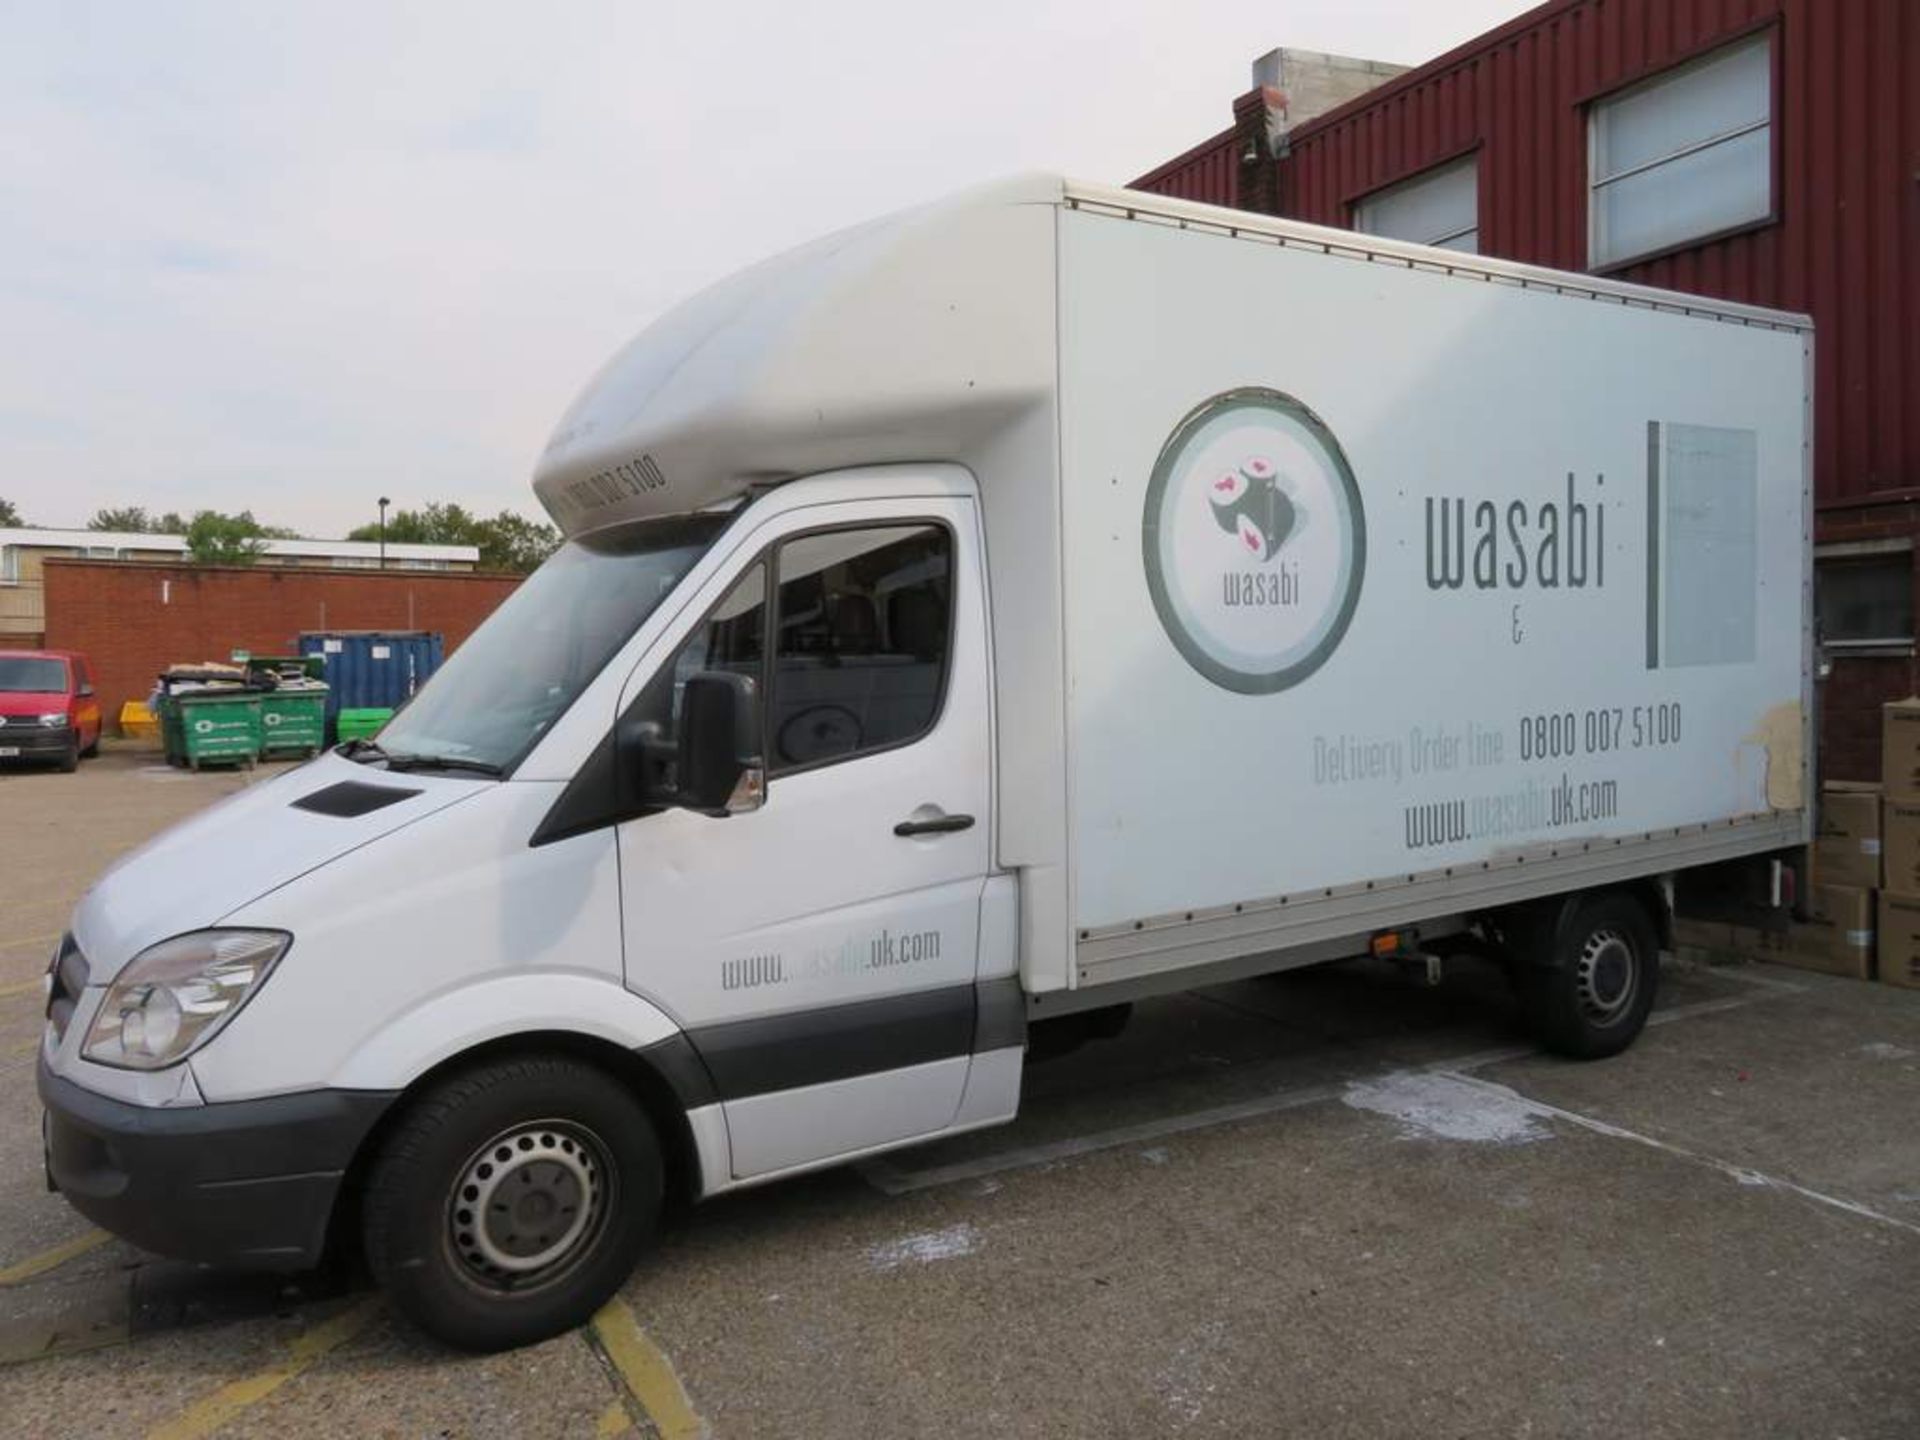 2007 Mercedes Sprinter 311 Luton Van. Fitted with a Slim Jim 500kg taillift